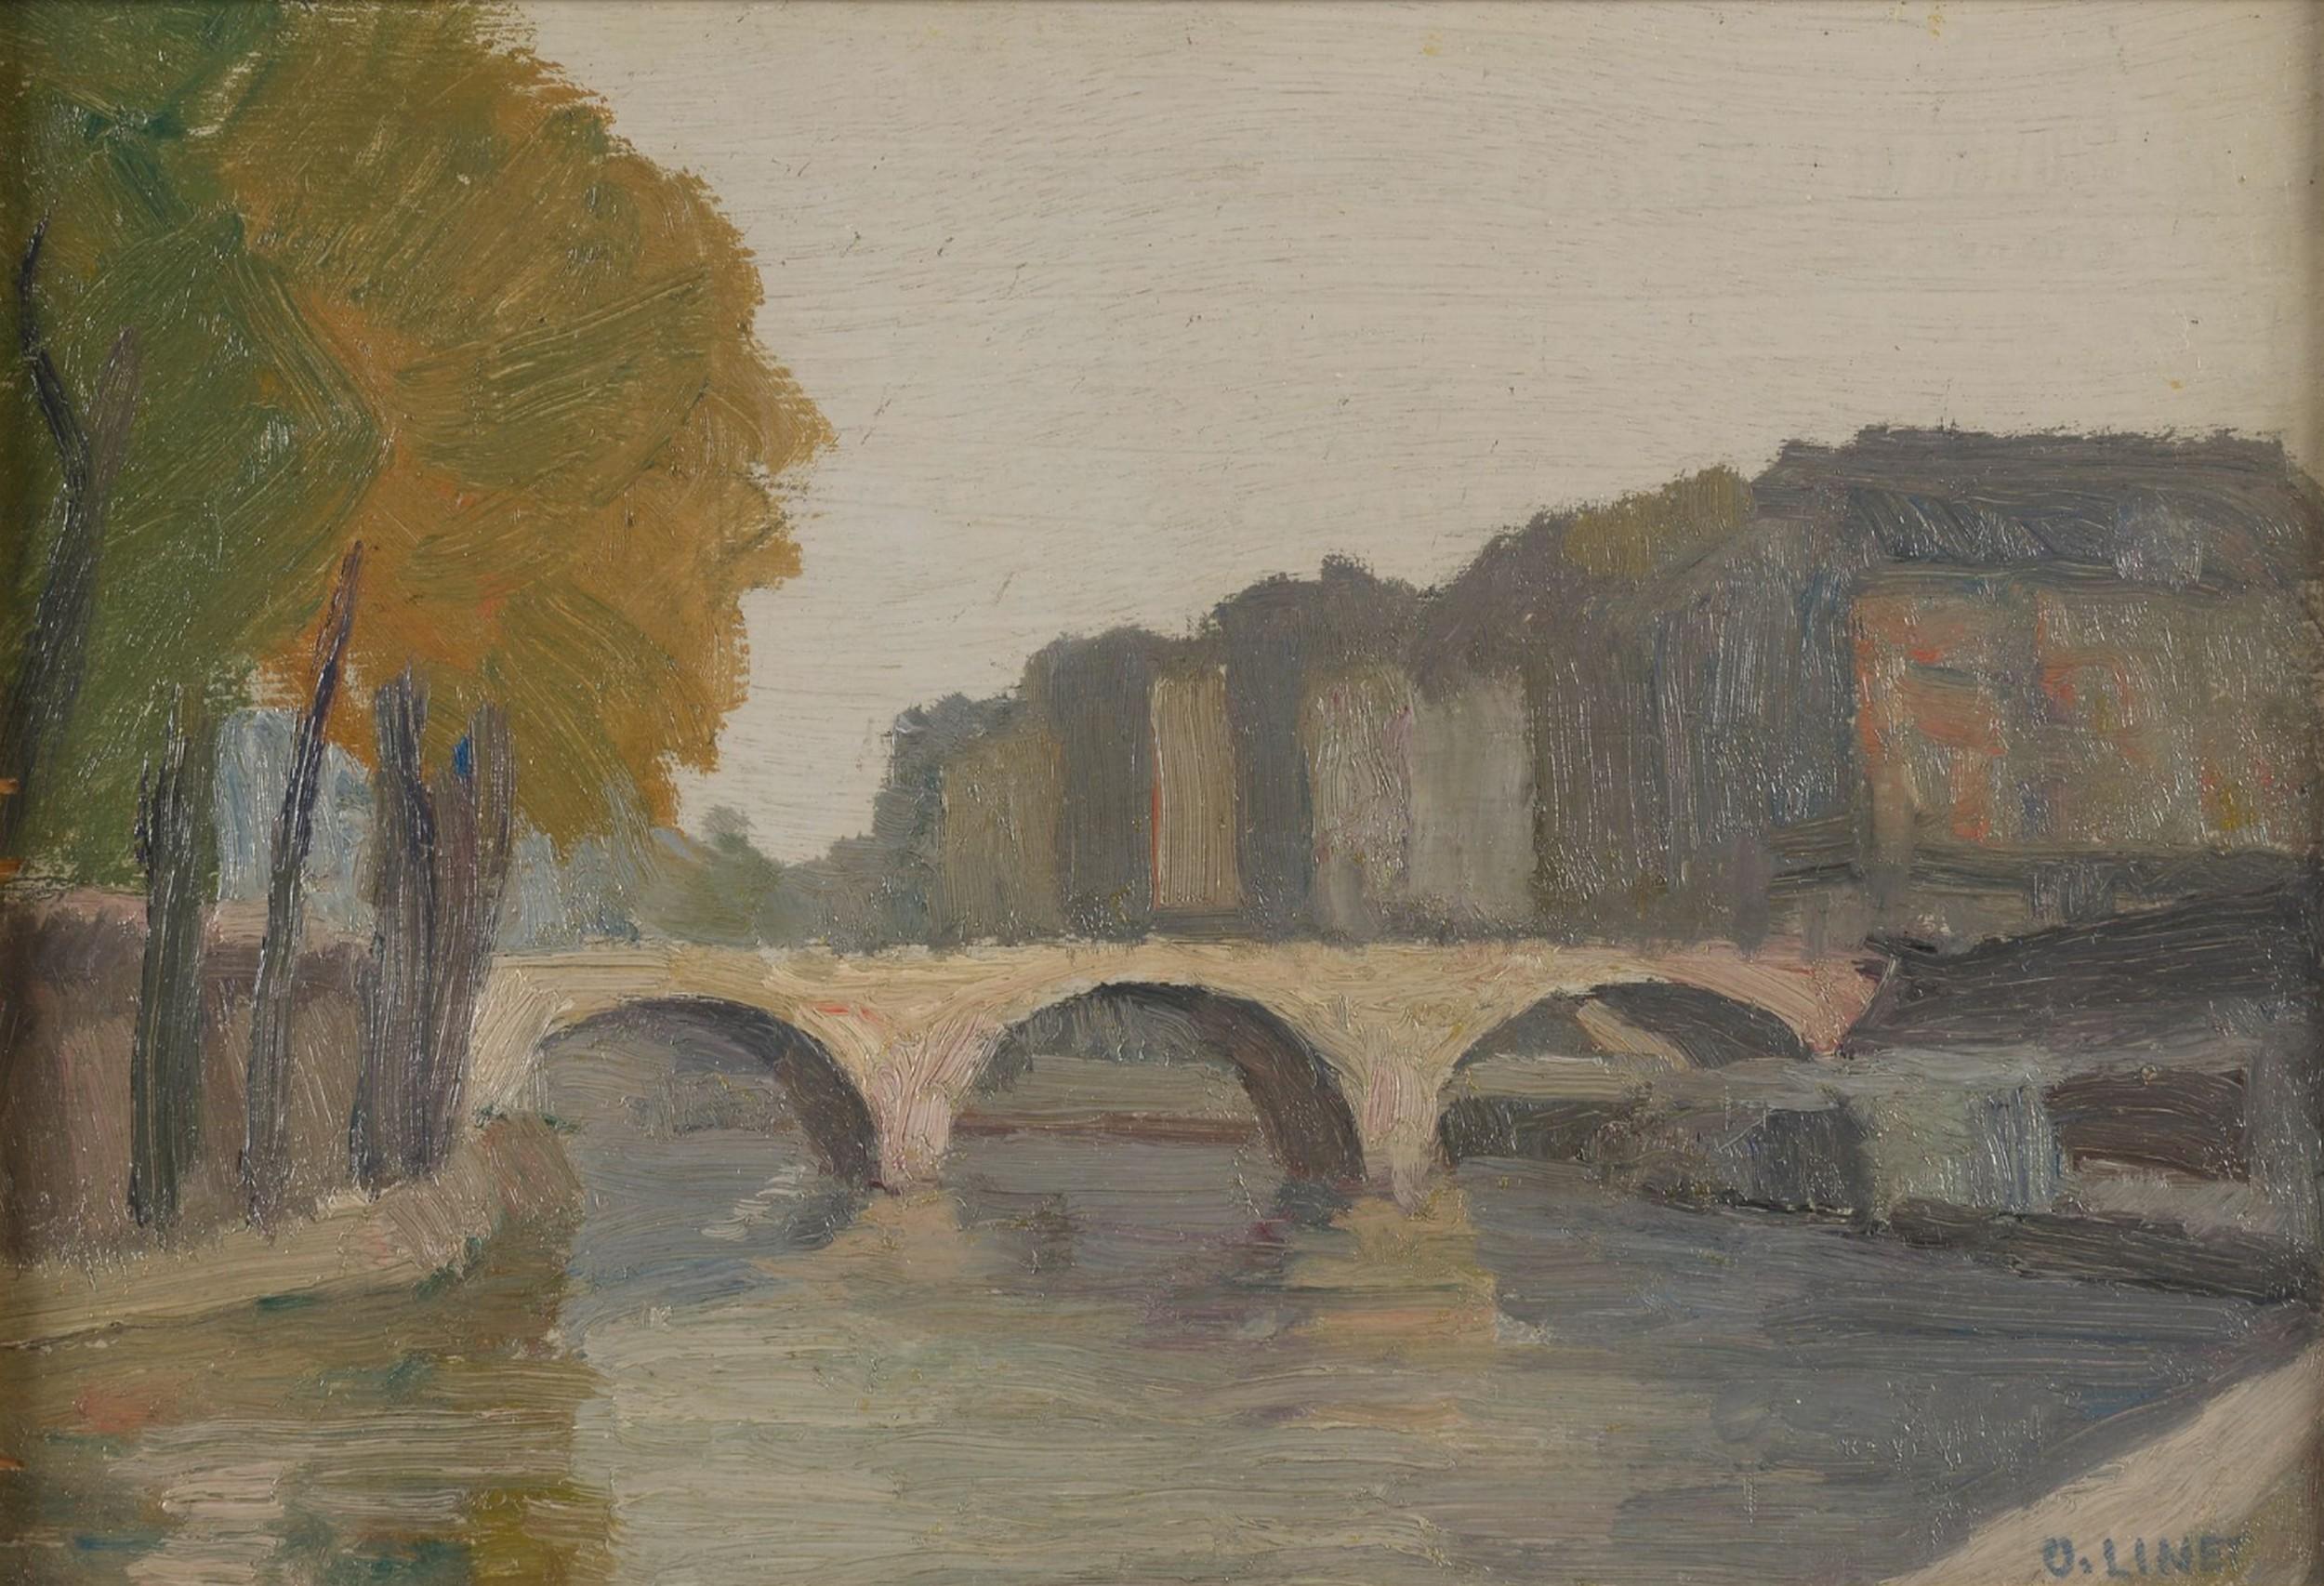 Octave Linet (1870-1962) 
La Seine à Paris, The River Seine in Paris
signed  lower right
titled on a label on the back 
oil on panel
24 x 35,5 cm
In good condition except three small lacks of painting on the left border, see detail photograph